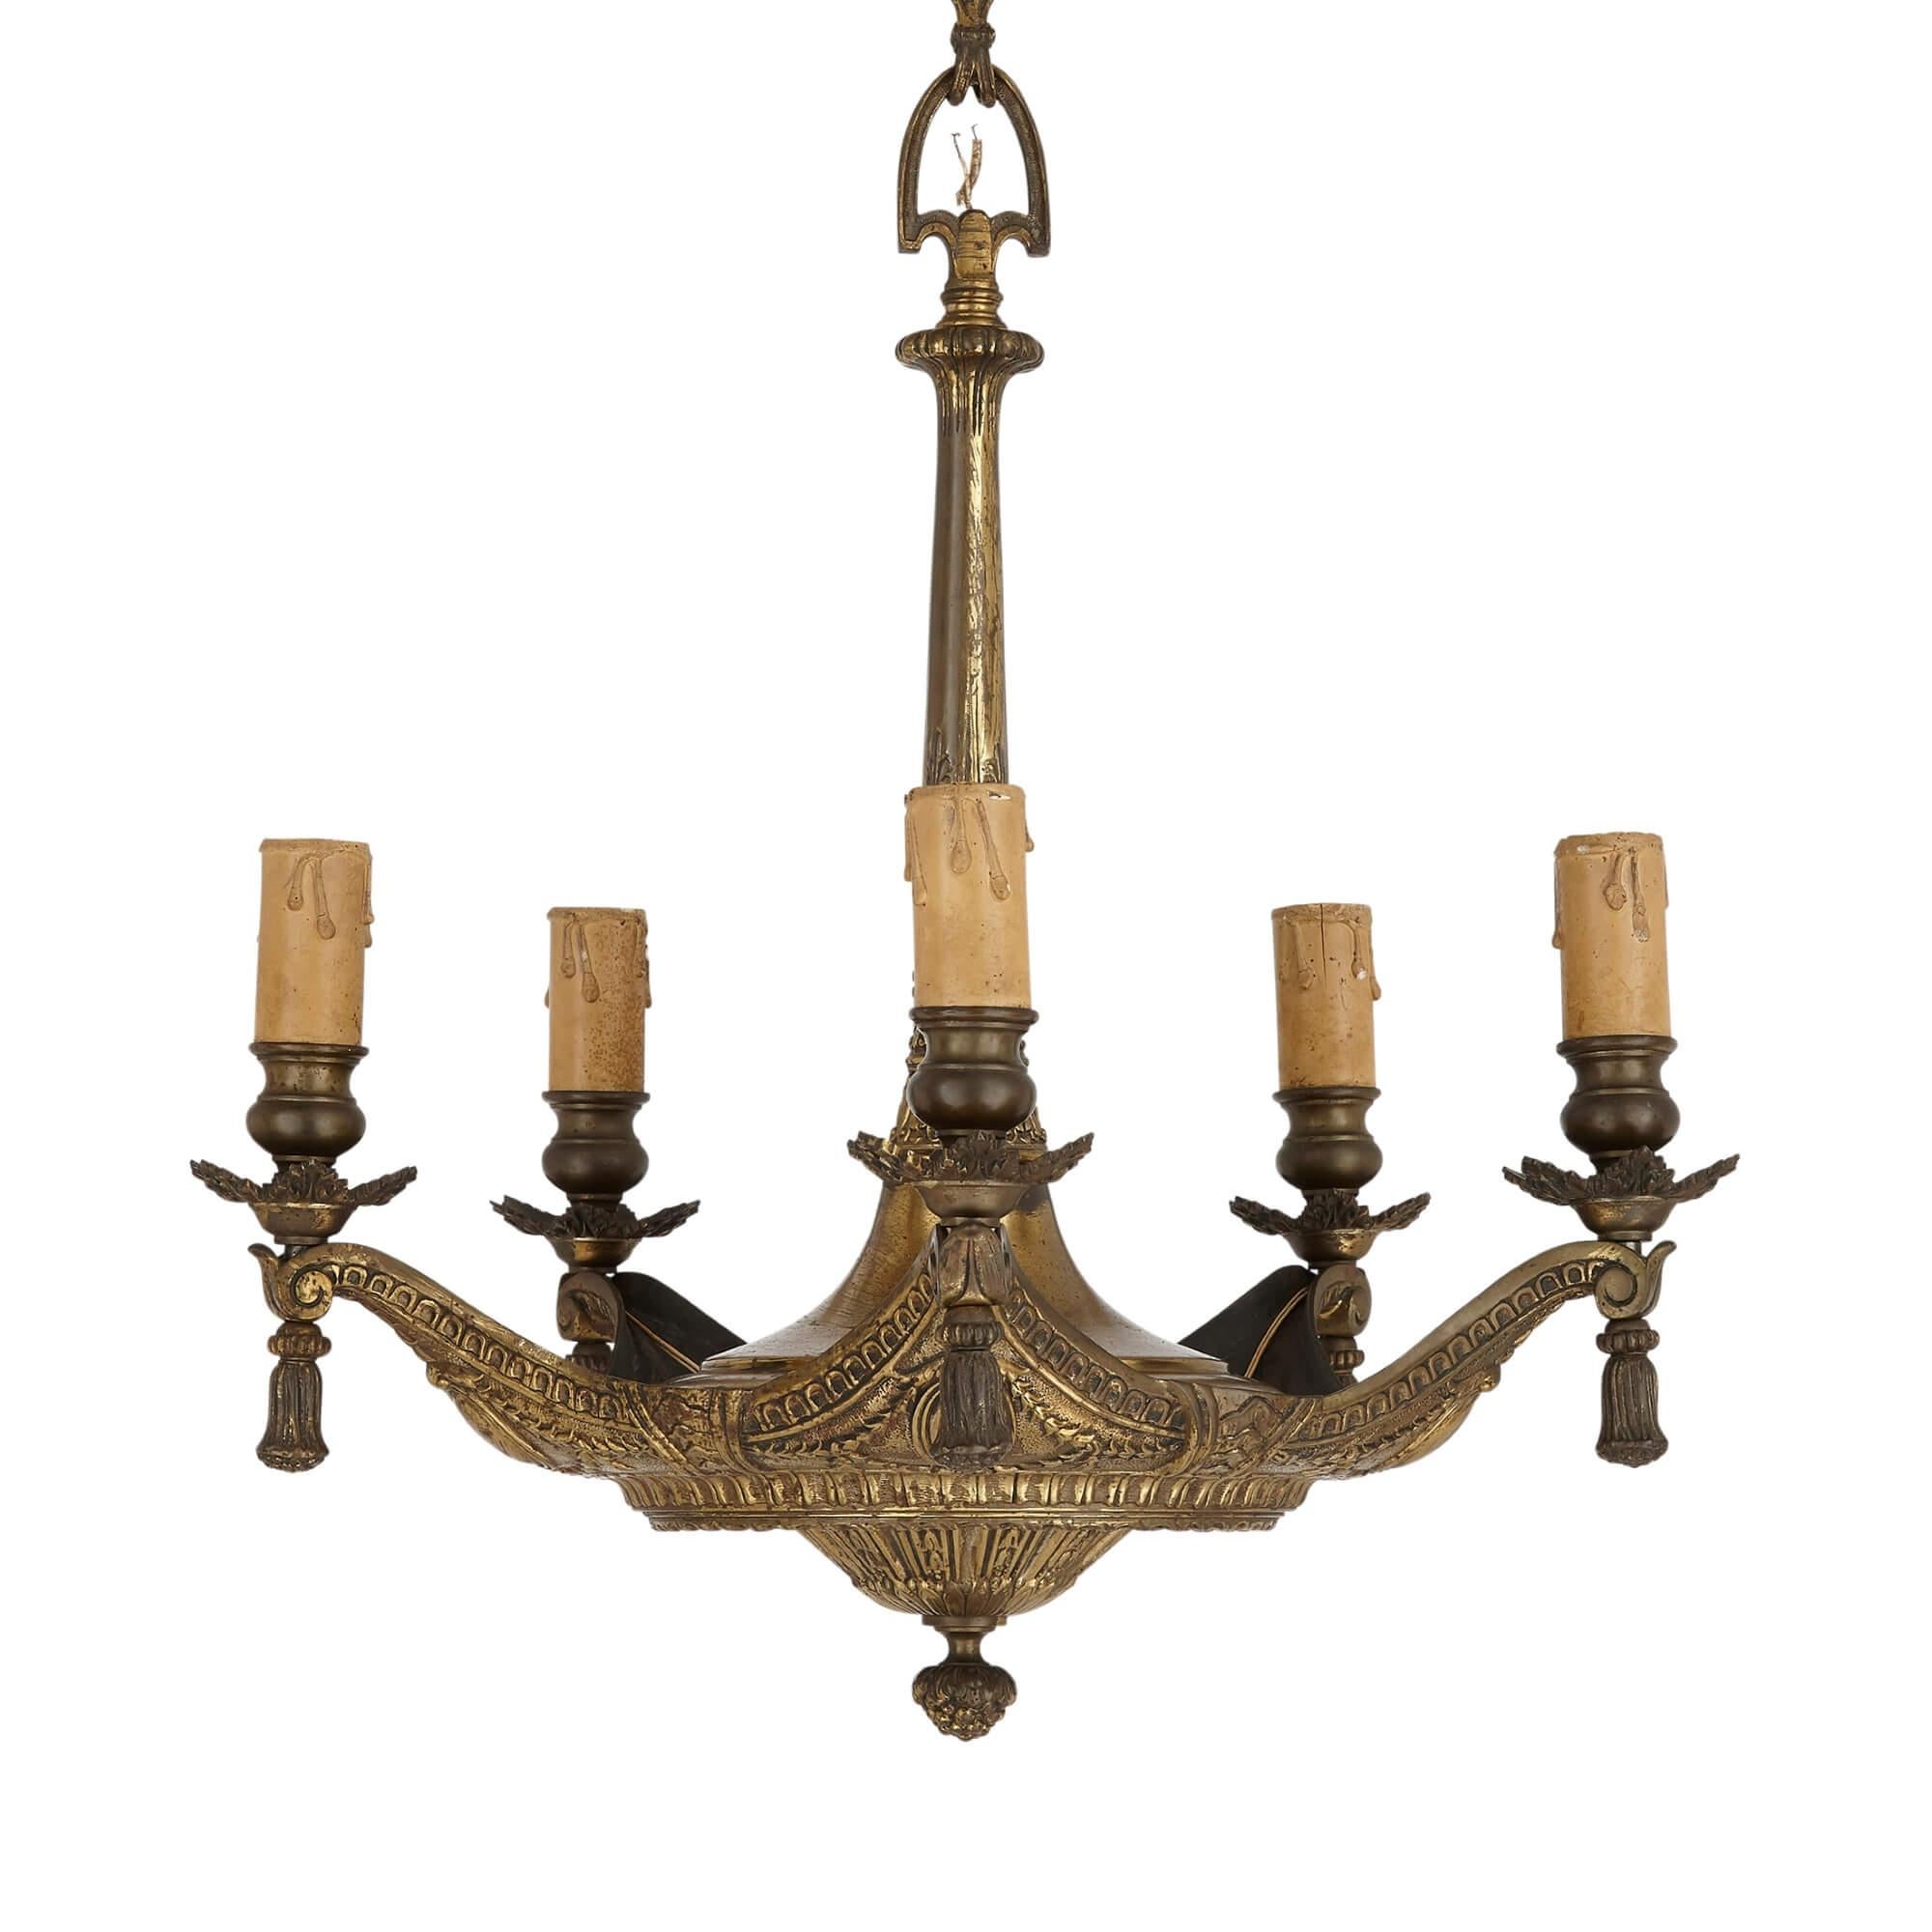 Unusual French gilt bronze cushion-form chandelier
French, late 19th century
Measures: Height 59cm, width 51cm, depth 51cm

This unusual and beautiful gilt bronze chandelier is modelled in a decadent style as a cushion. The chandelier body